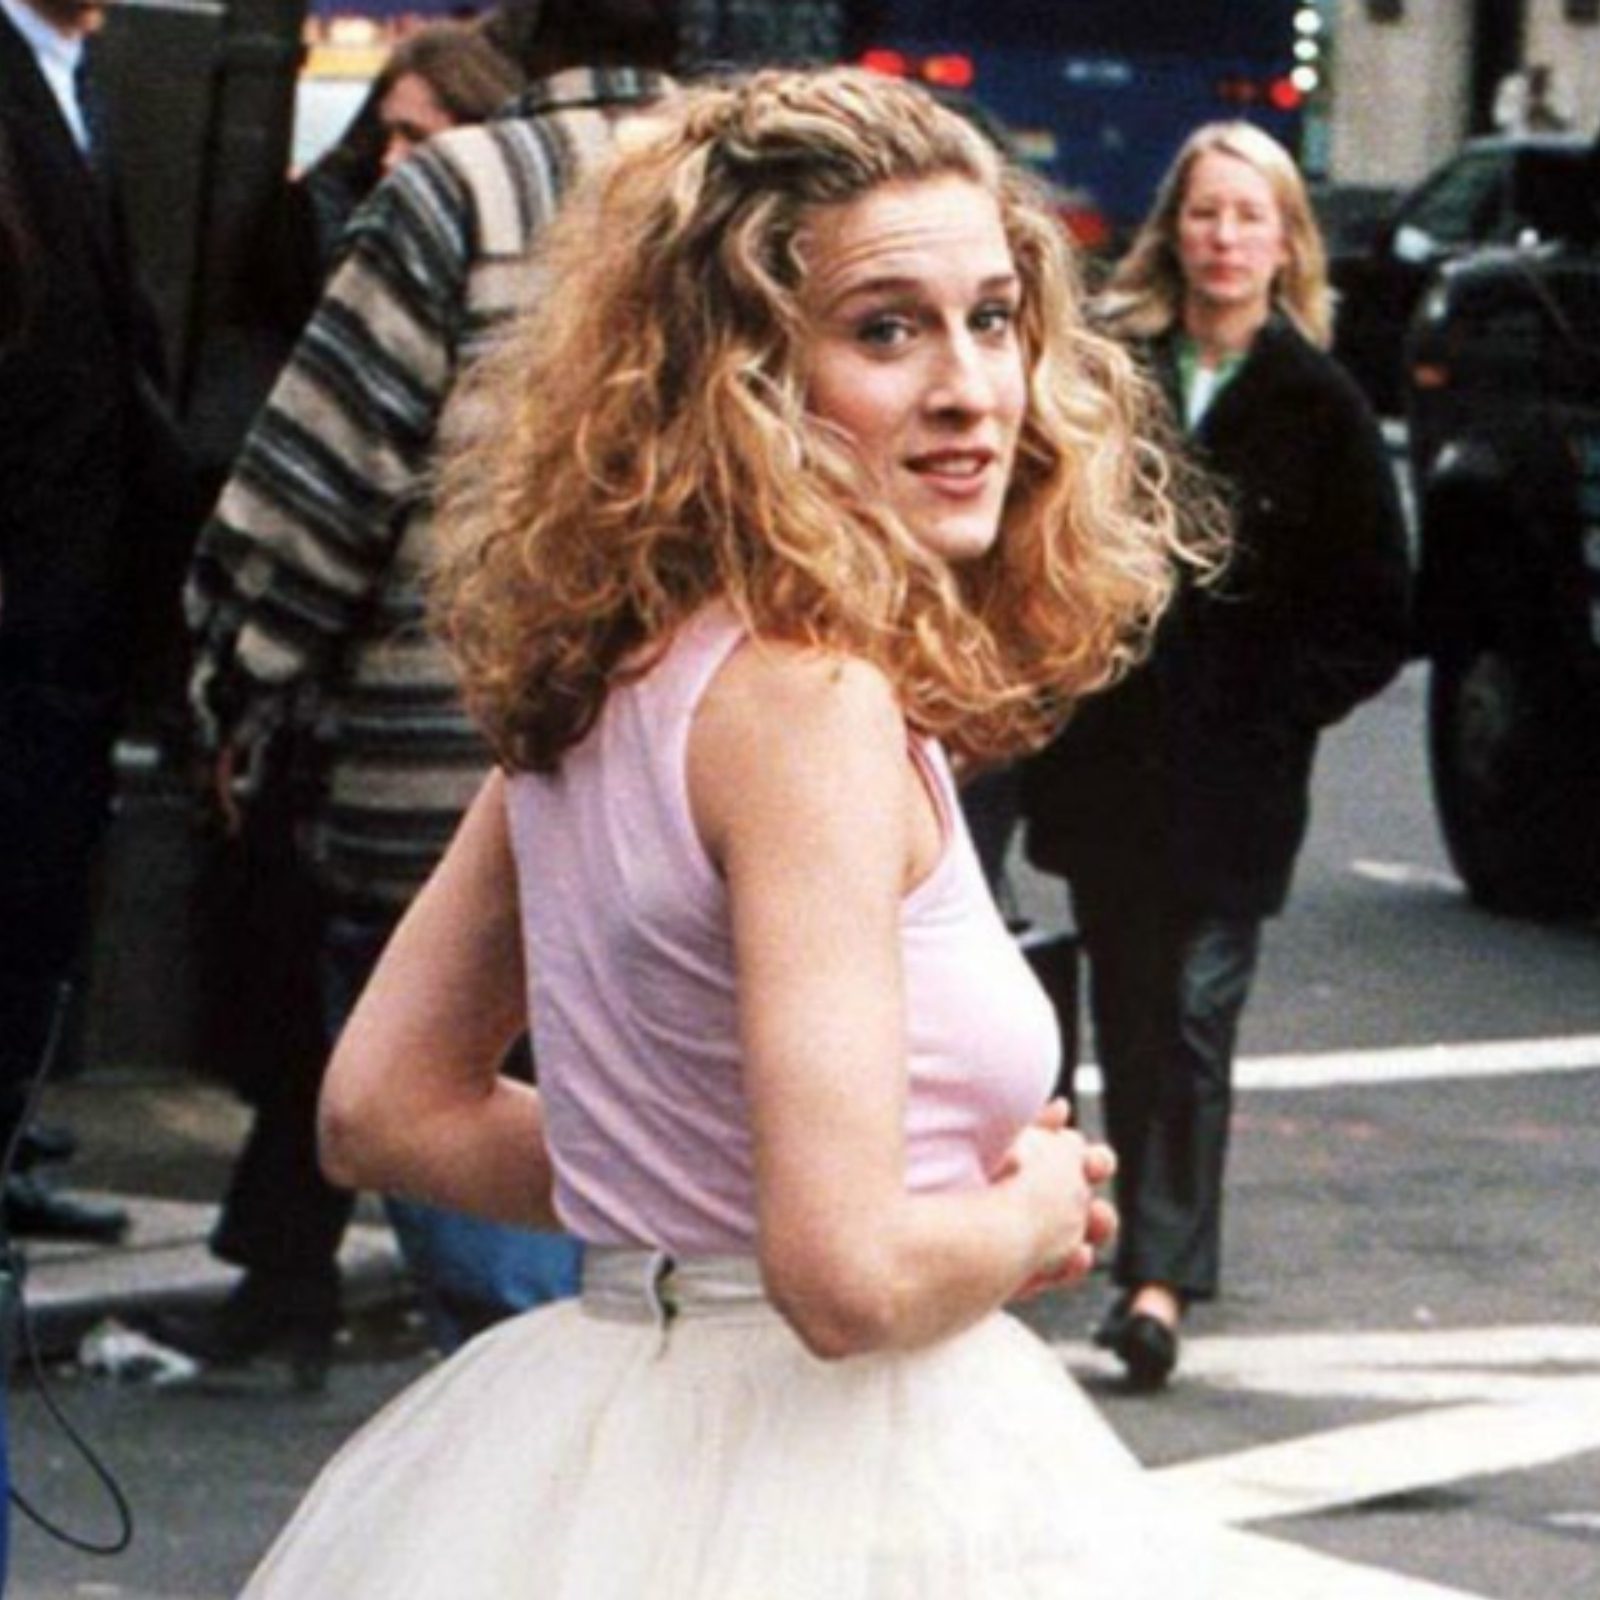 Sex and the City Just Turned 25, And We Couldnt Help But Look Back at Carrie Bradshaws Hair(volution)